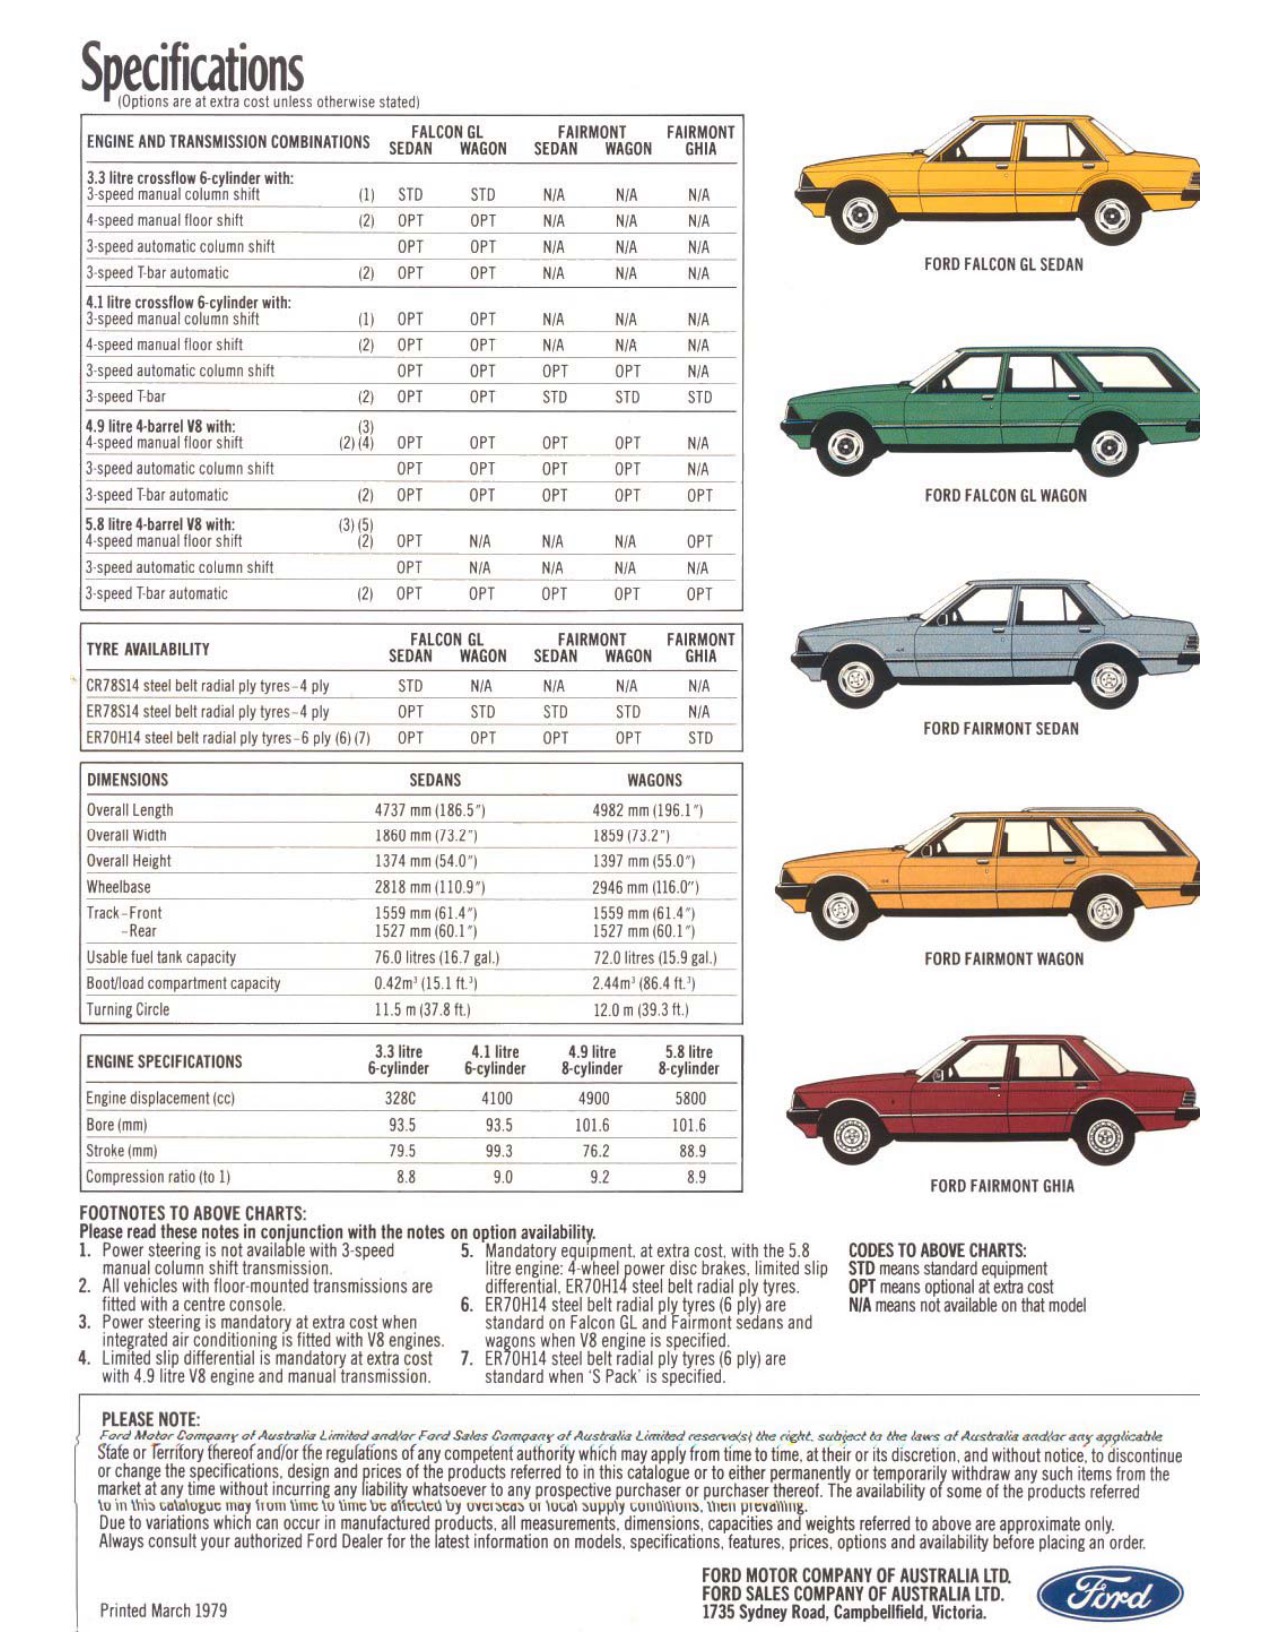 Ford Falcon XD Specifications Brochure